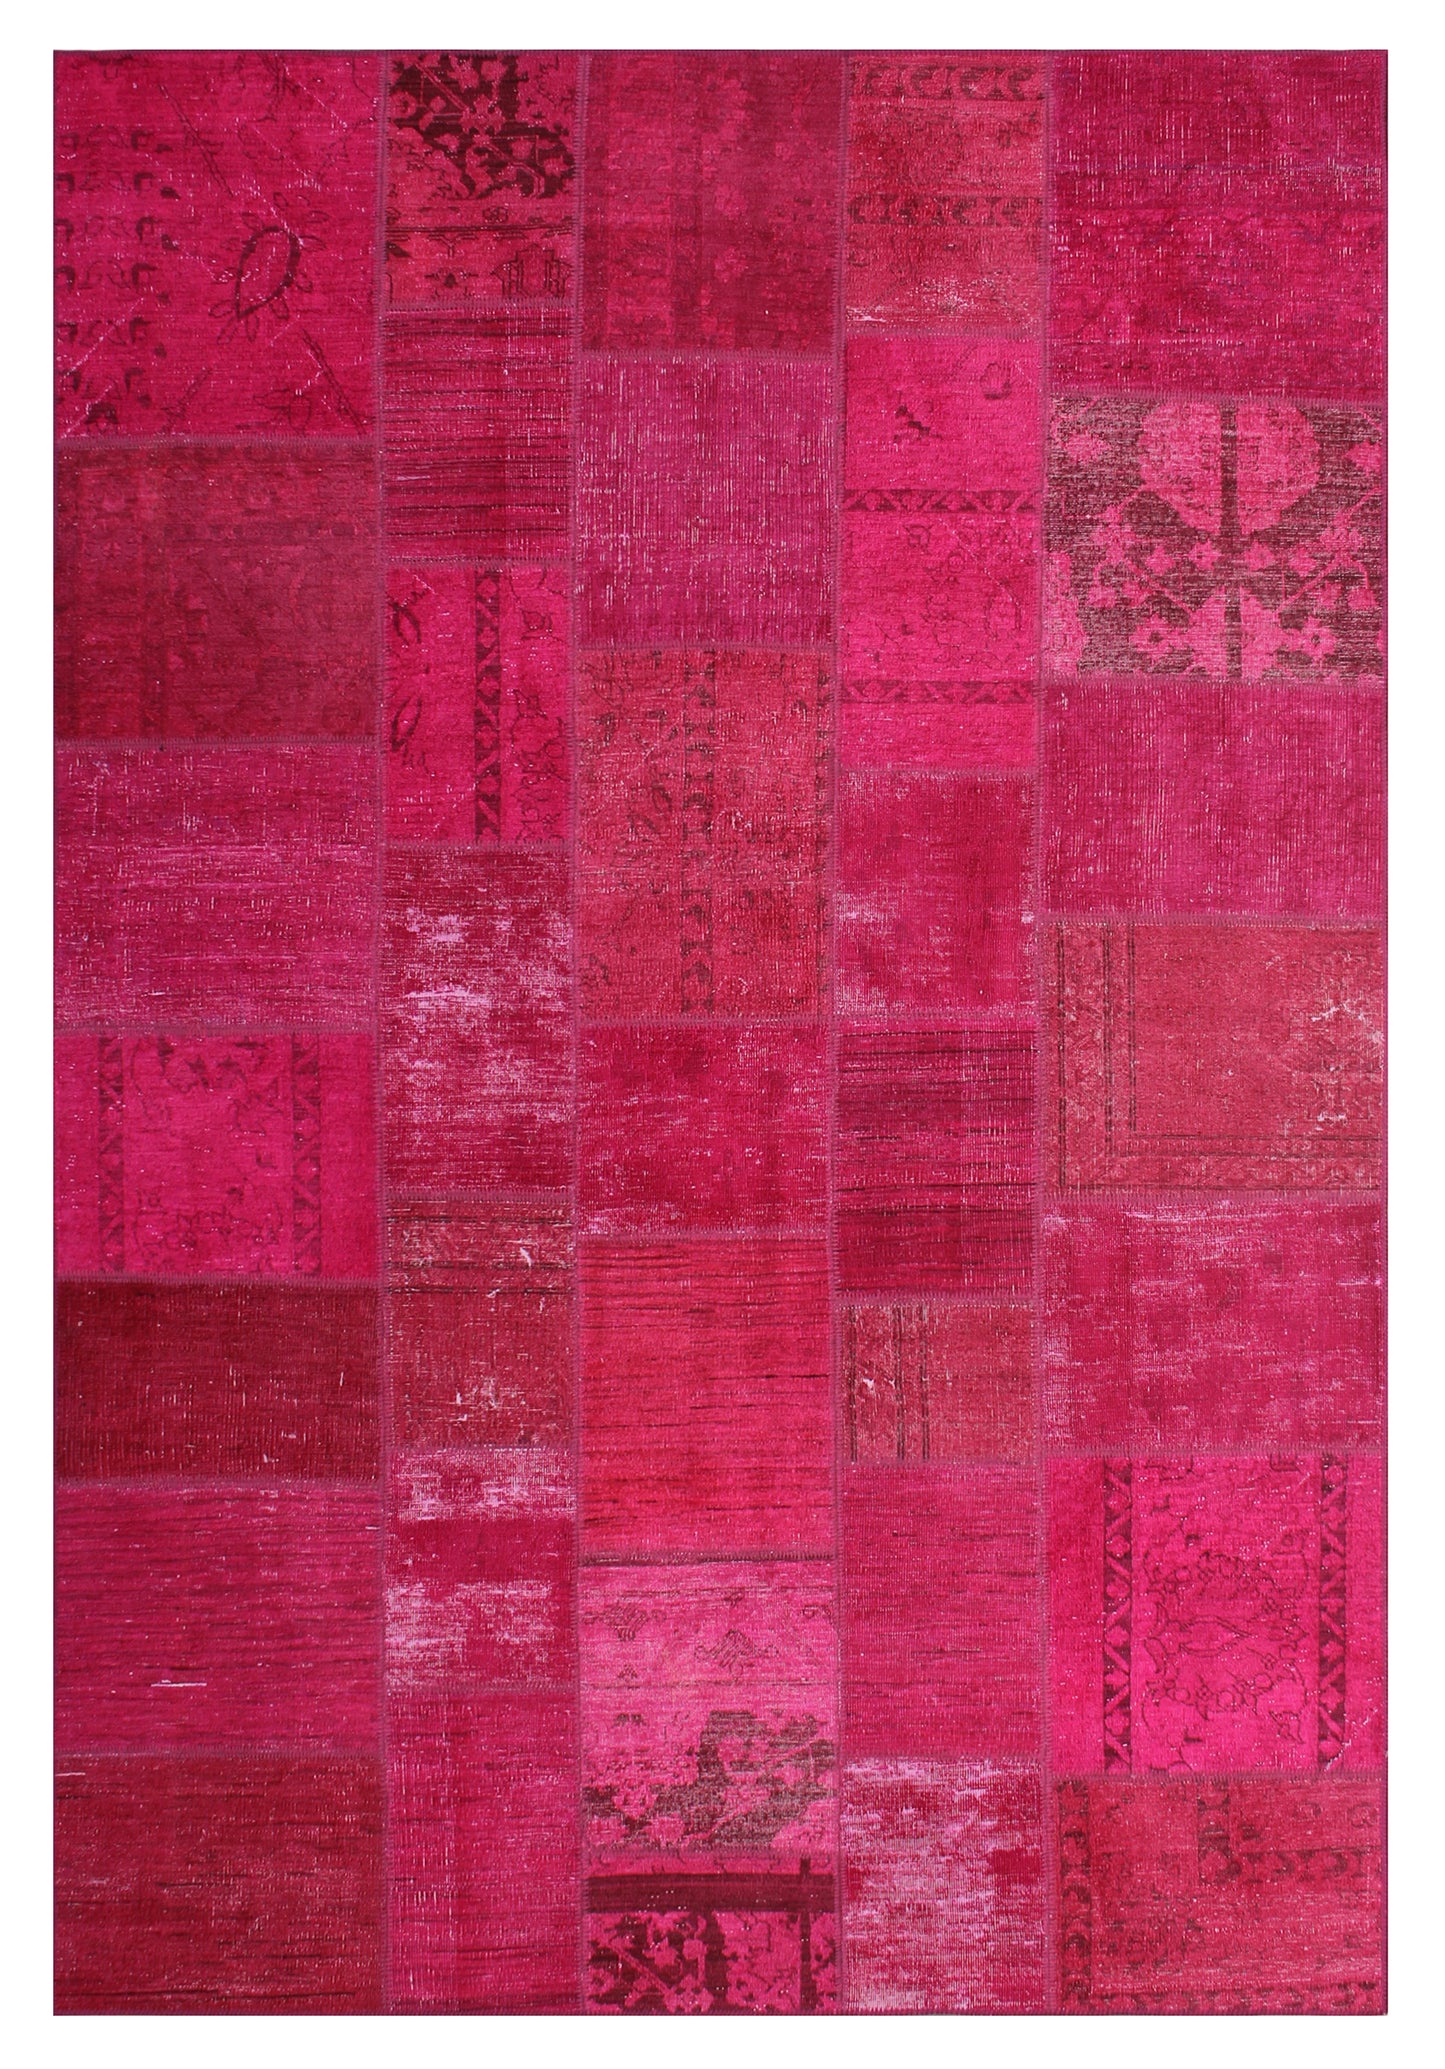 7'x10' Vibrant Hot Pink Ariana Patchwork Overdyed Area Rug